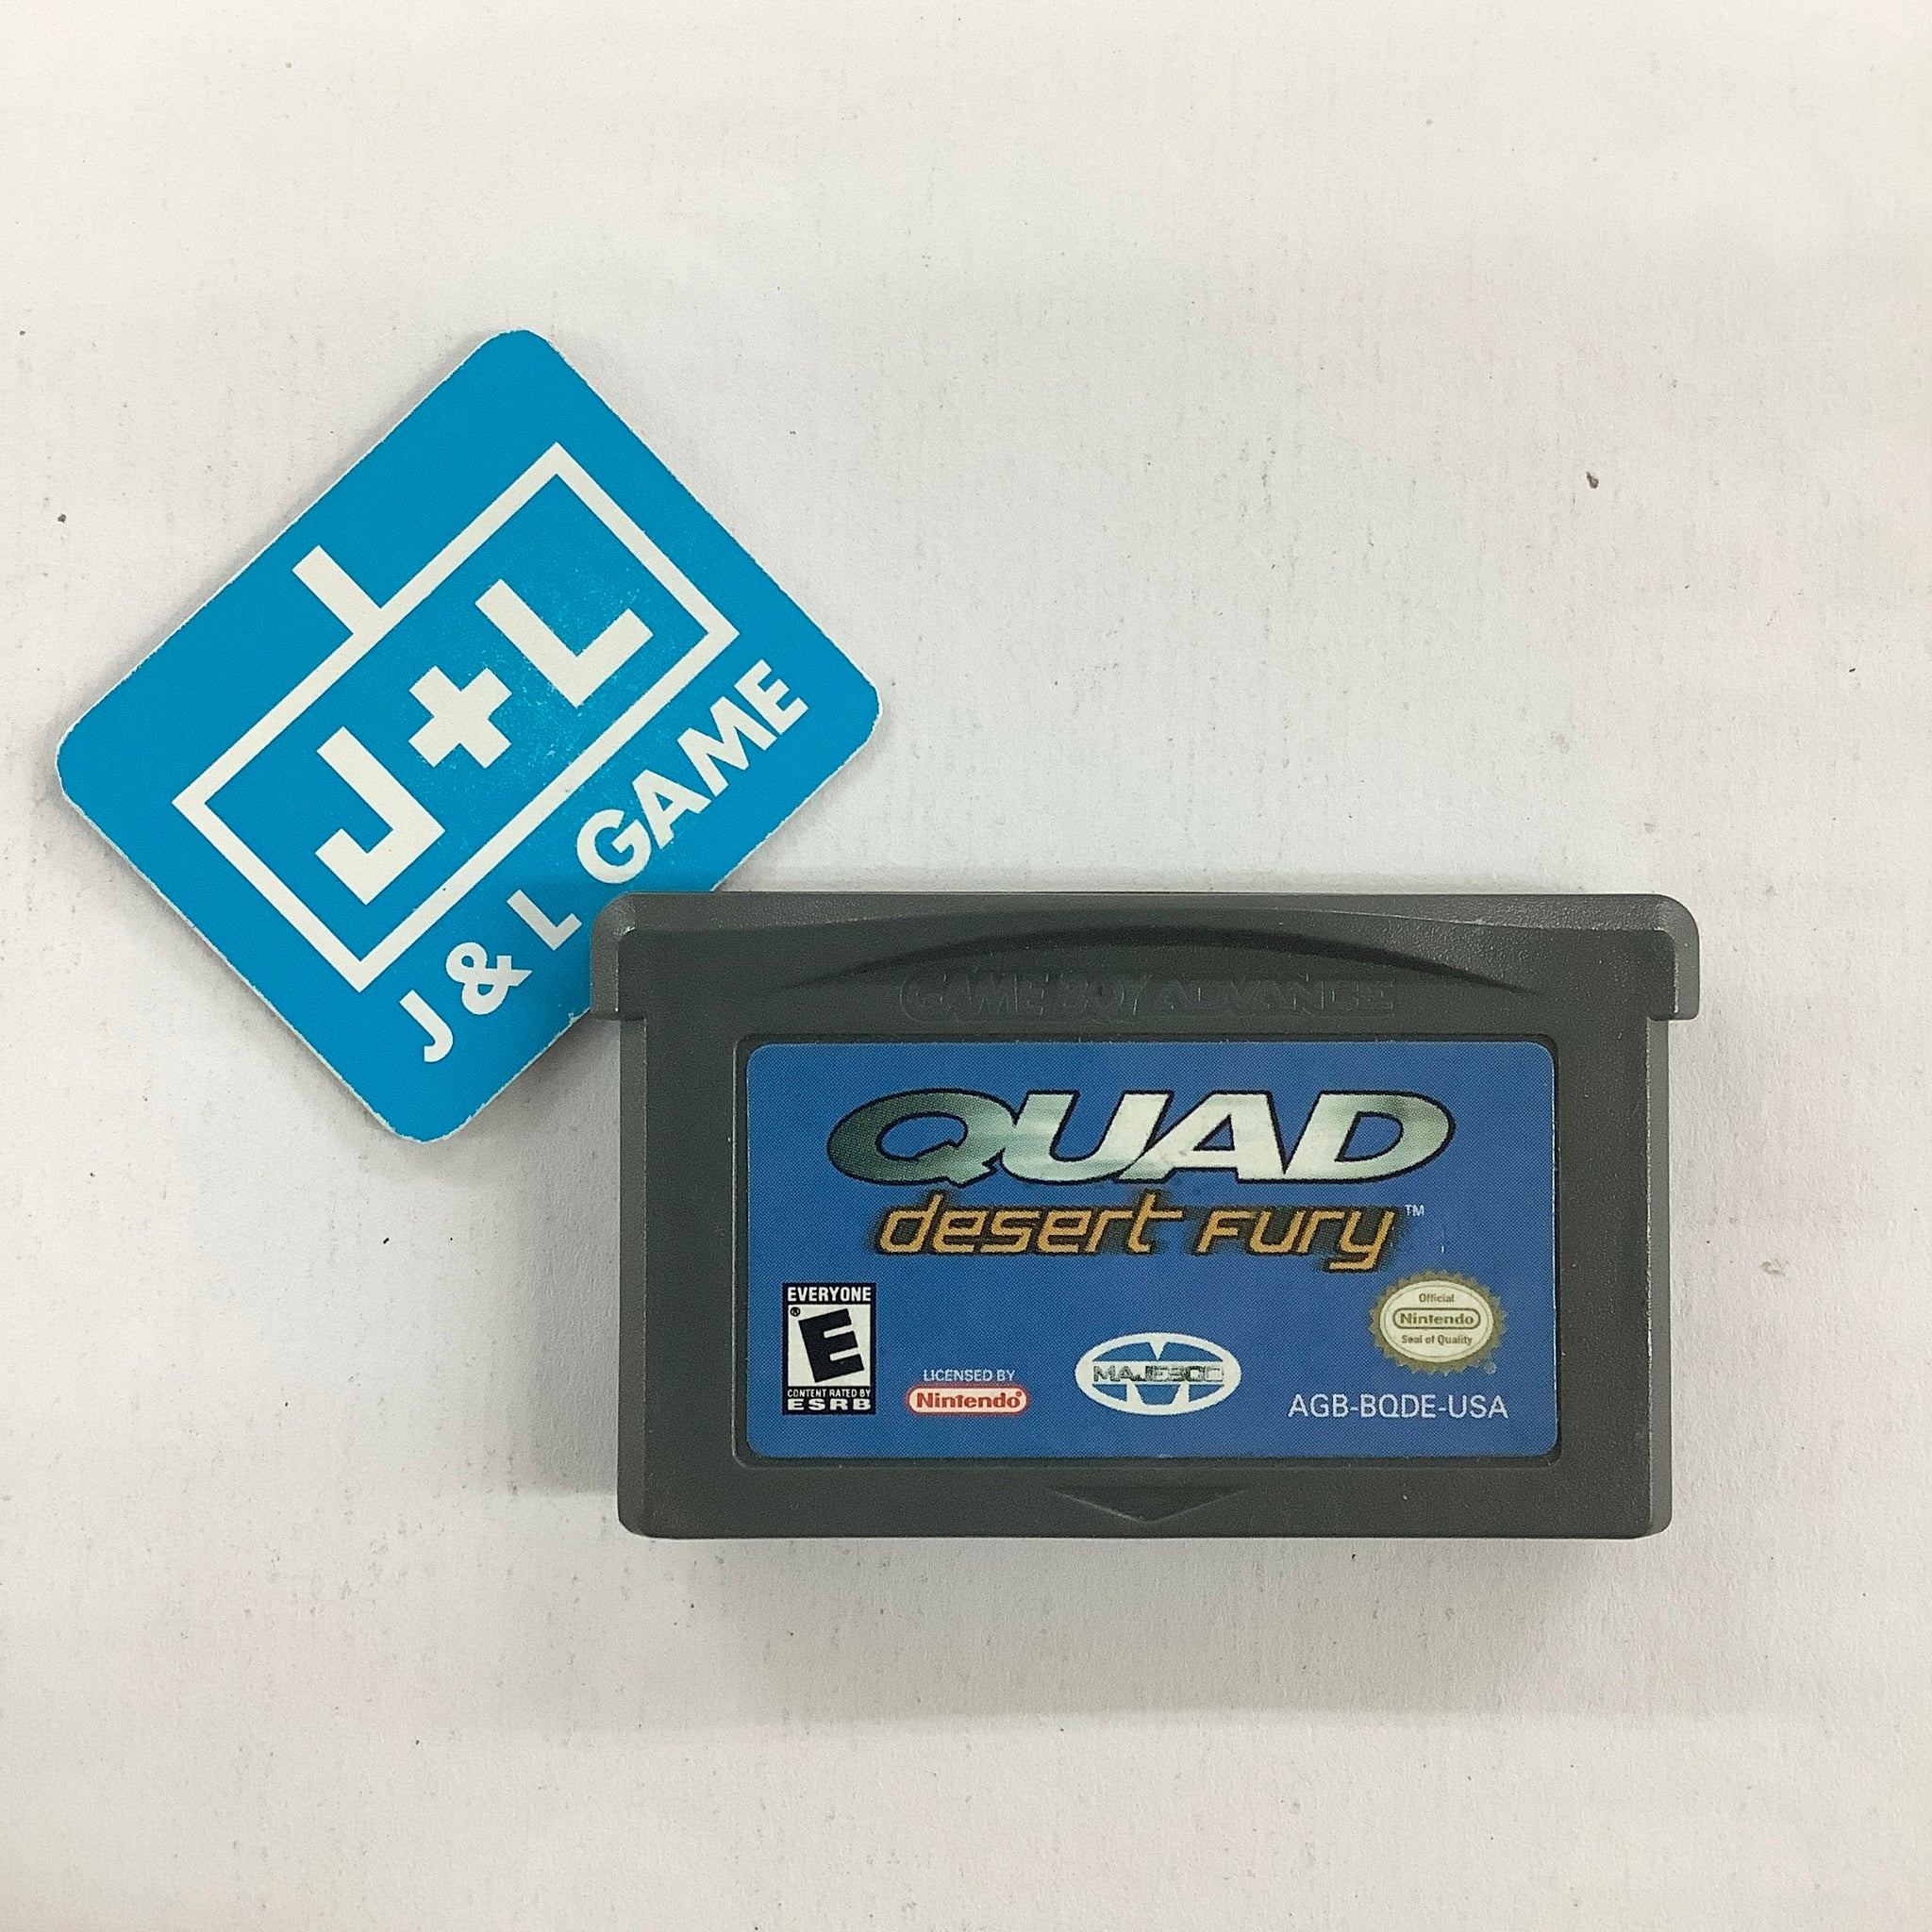 Quad Desert Fury - (GBA) Game Boy Advance [Pre-Owned] Video Games Majesco   